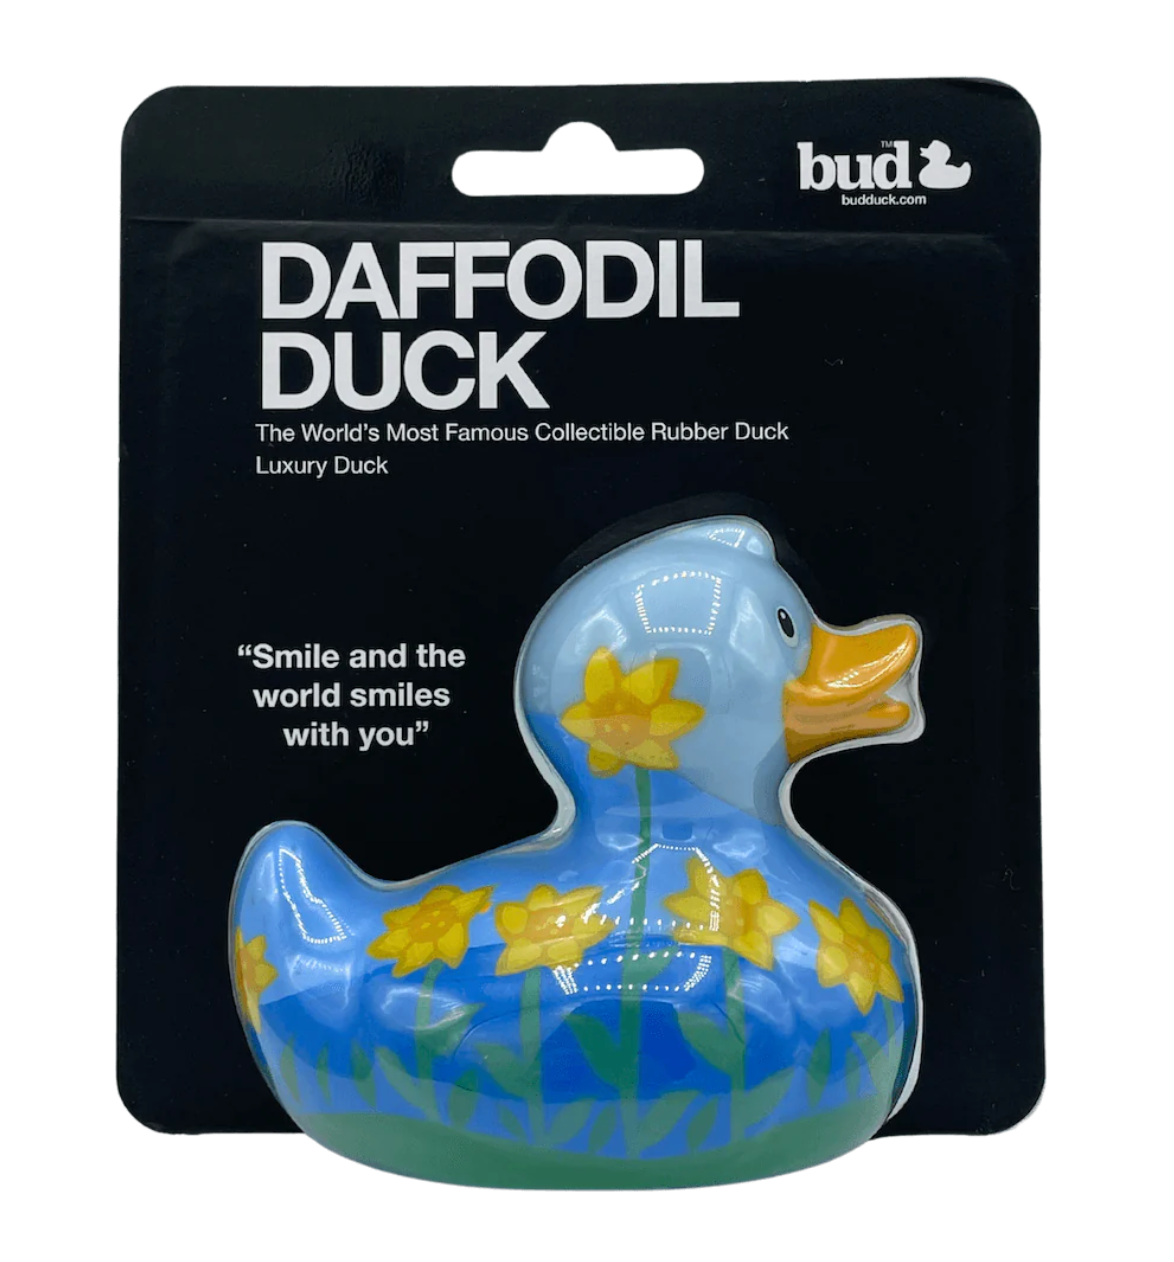 Daffodil Rubber Duck Packaging